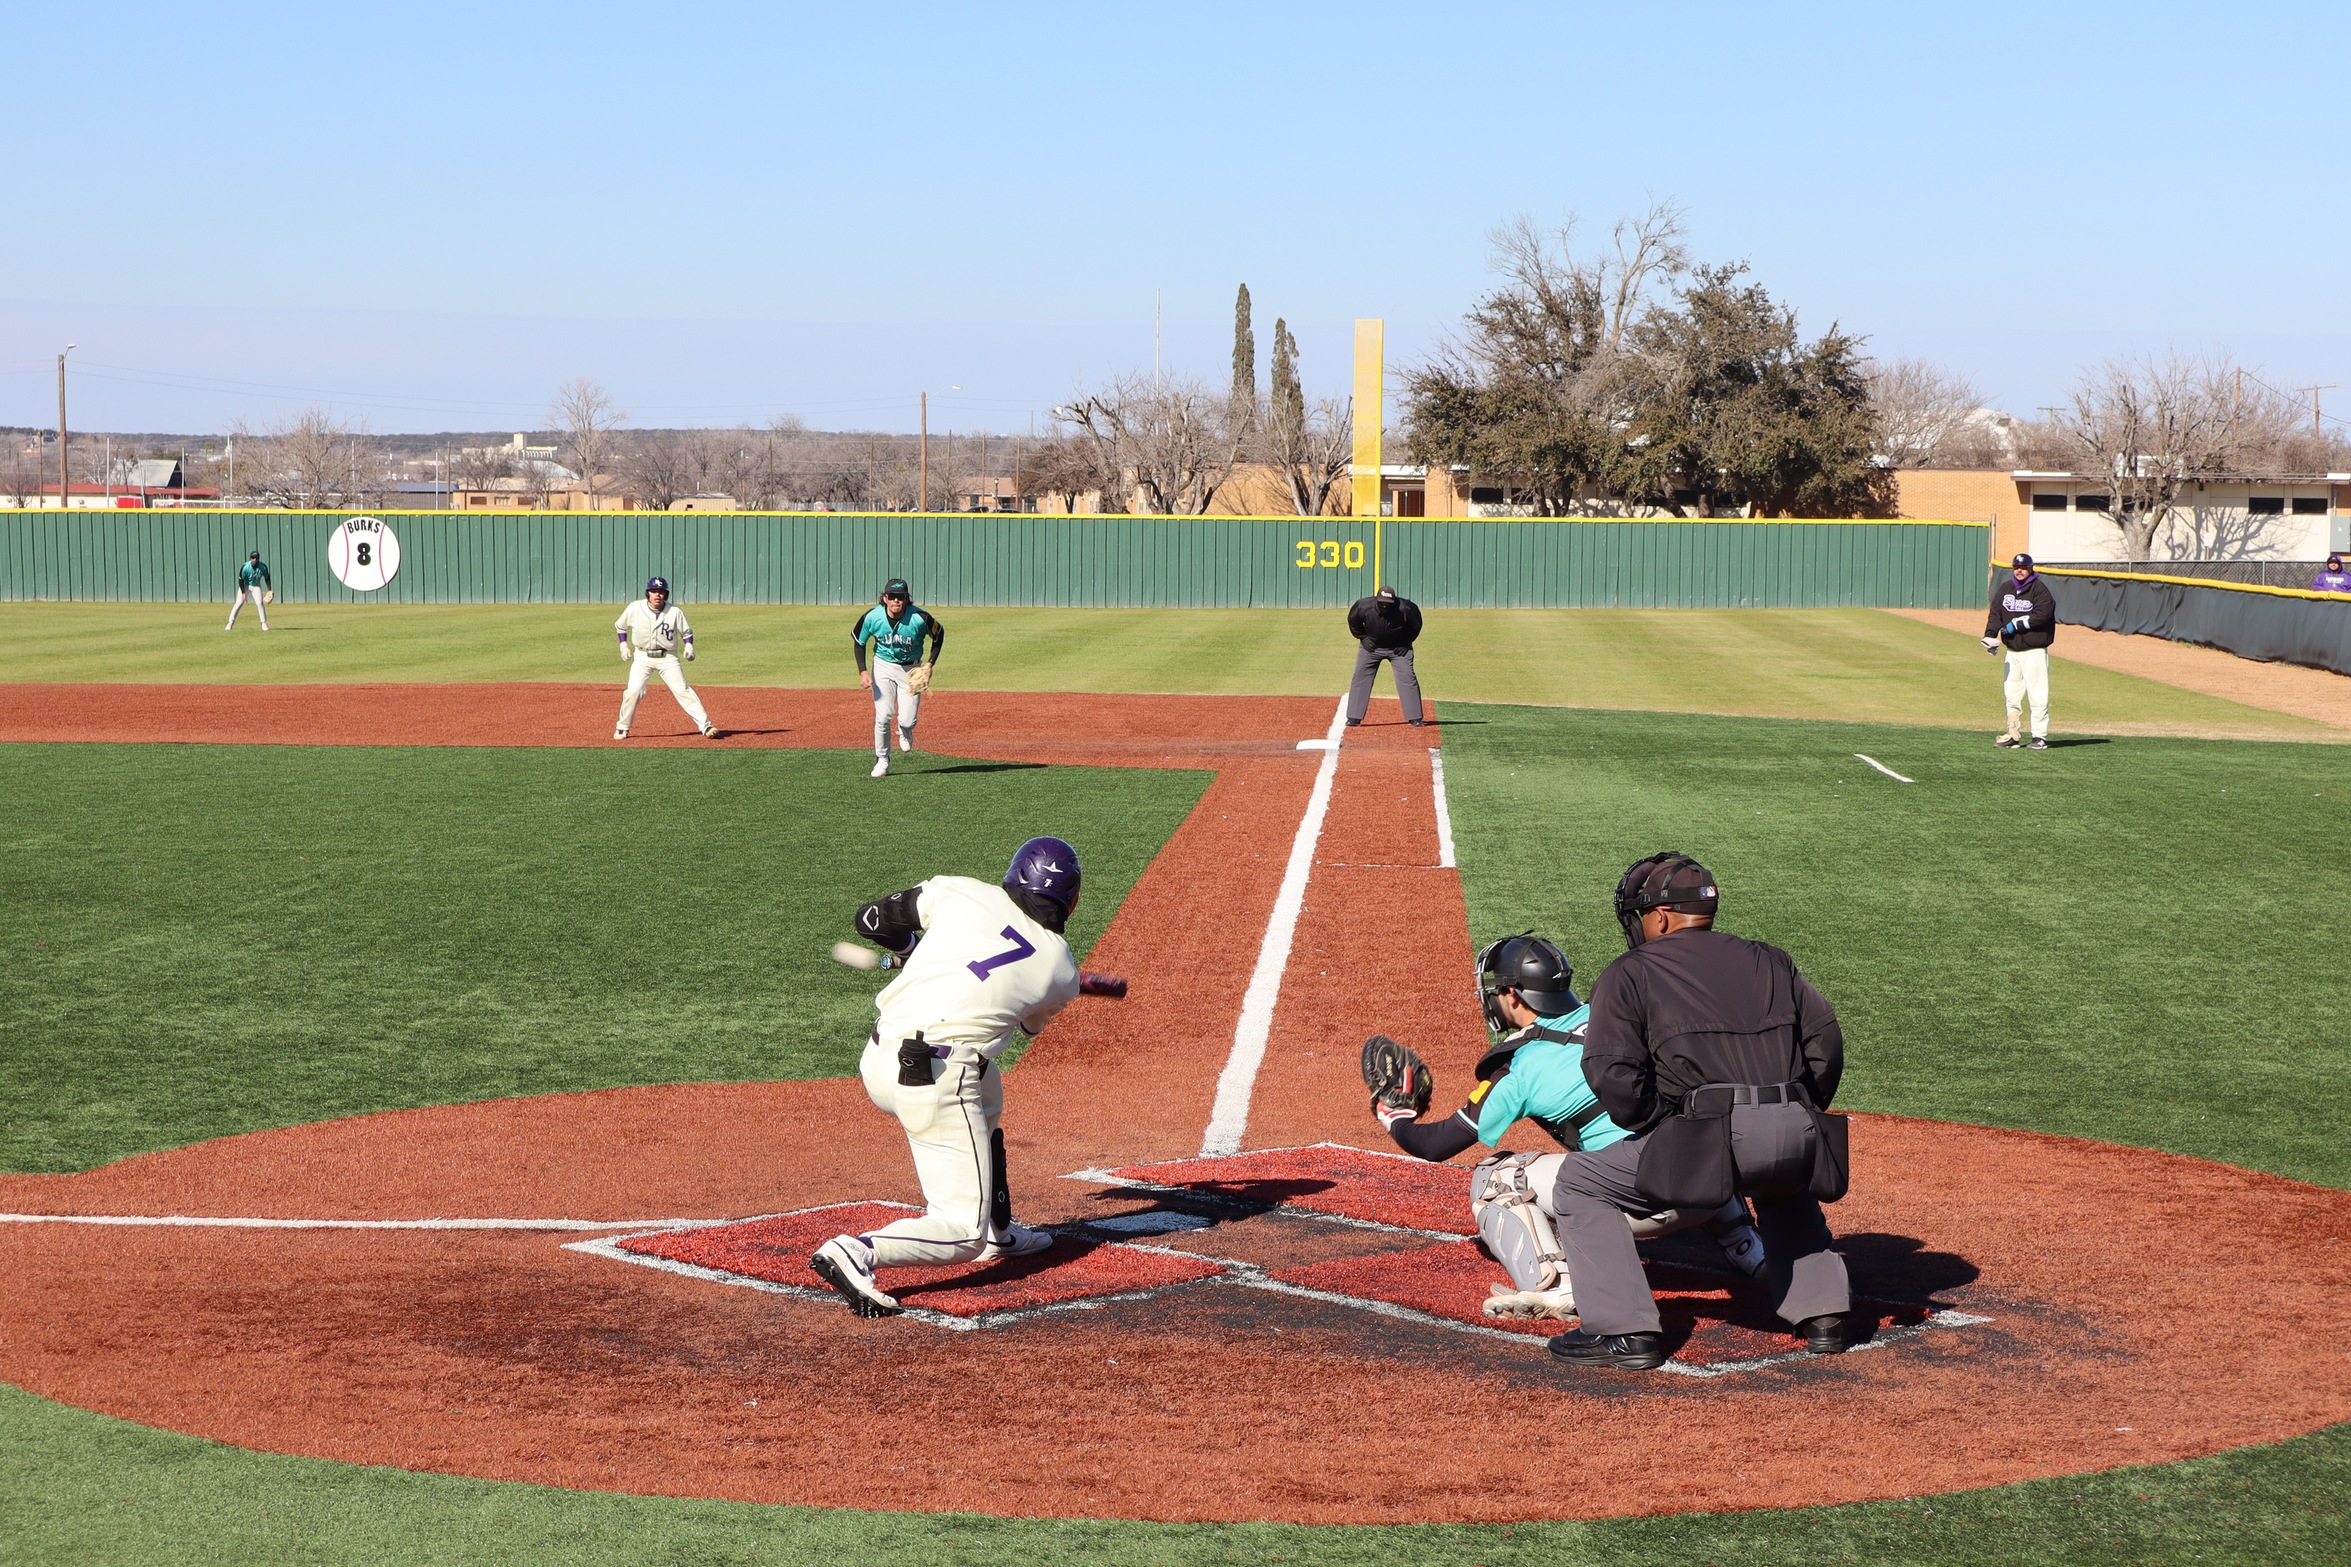 Ranger College splits the series down the middle with Western Texas College, 2 games to 2.